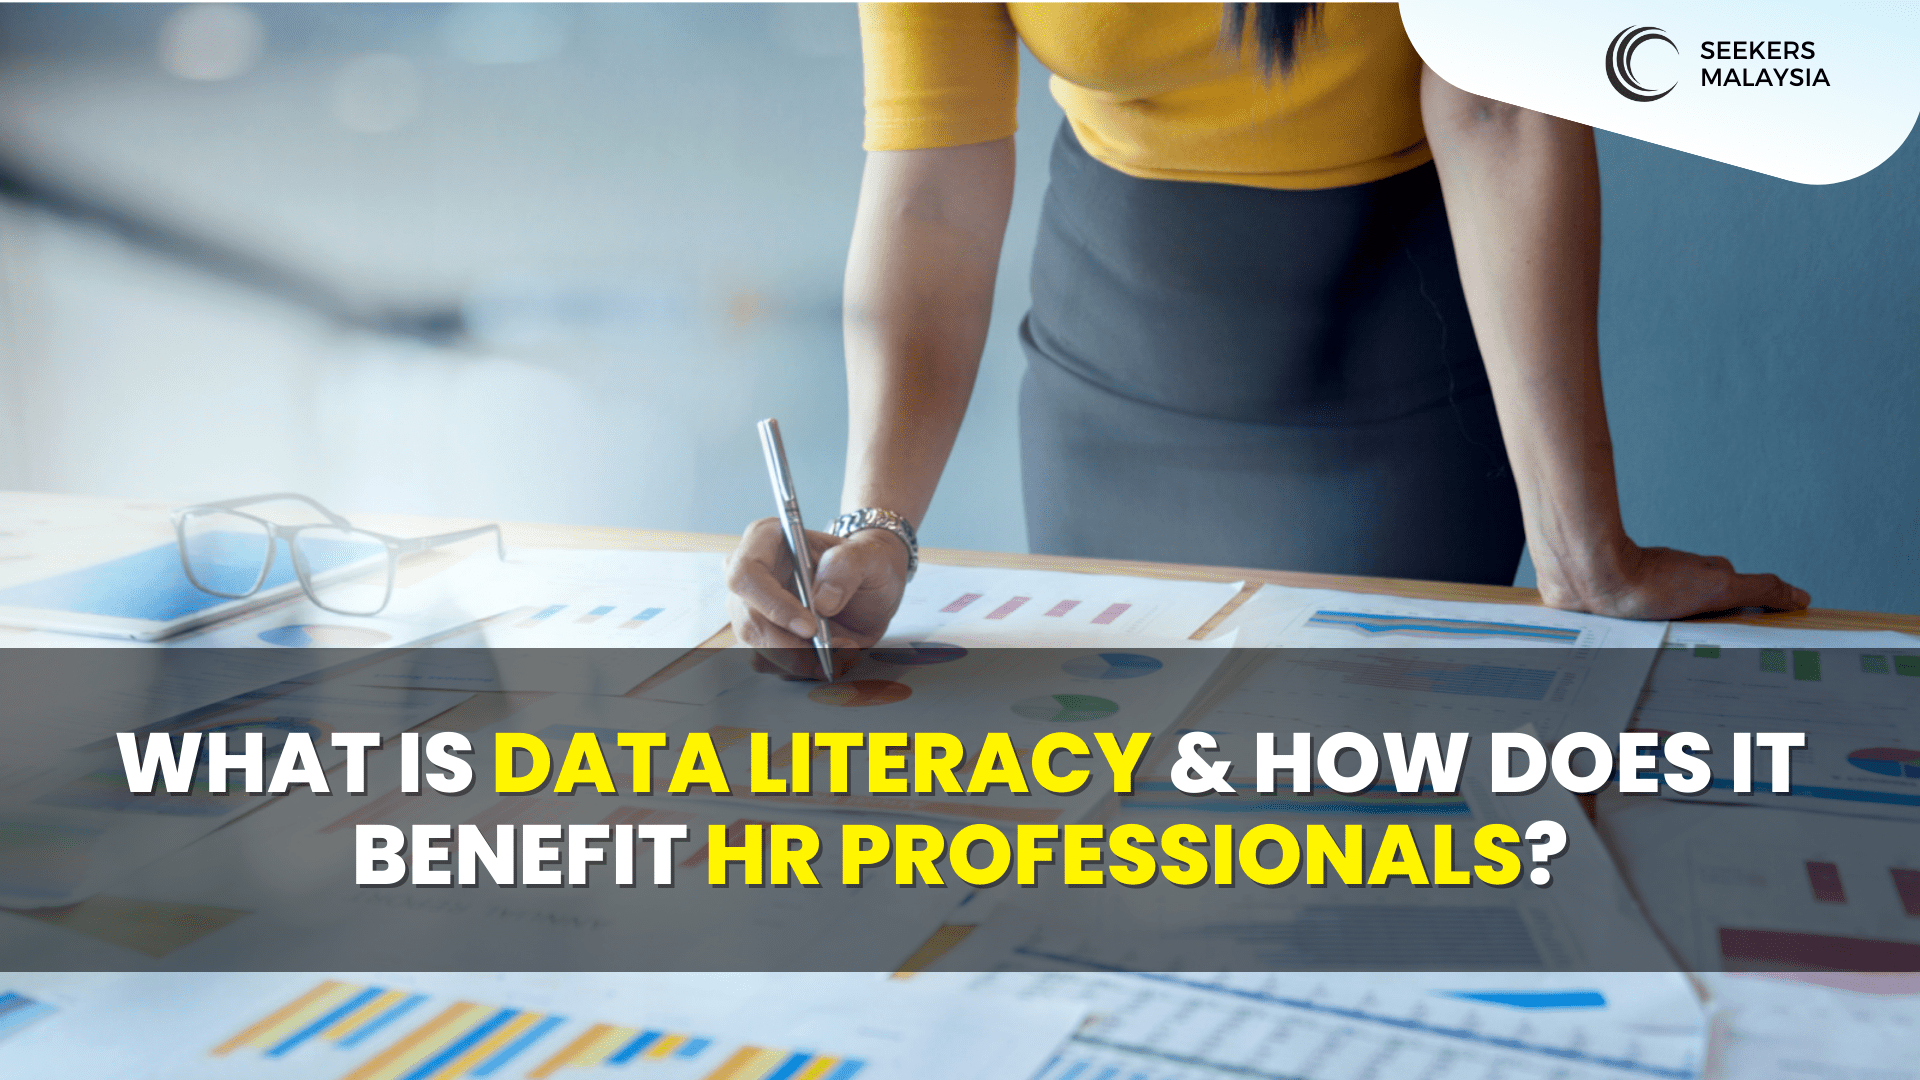 What Is Data Literacy & How Does It Benefit HR Professionals?